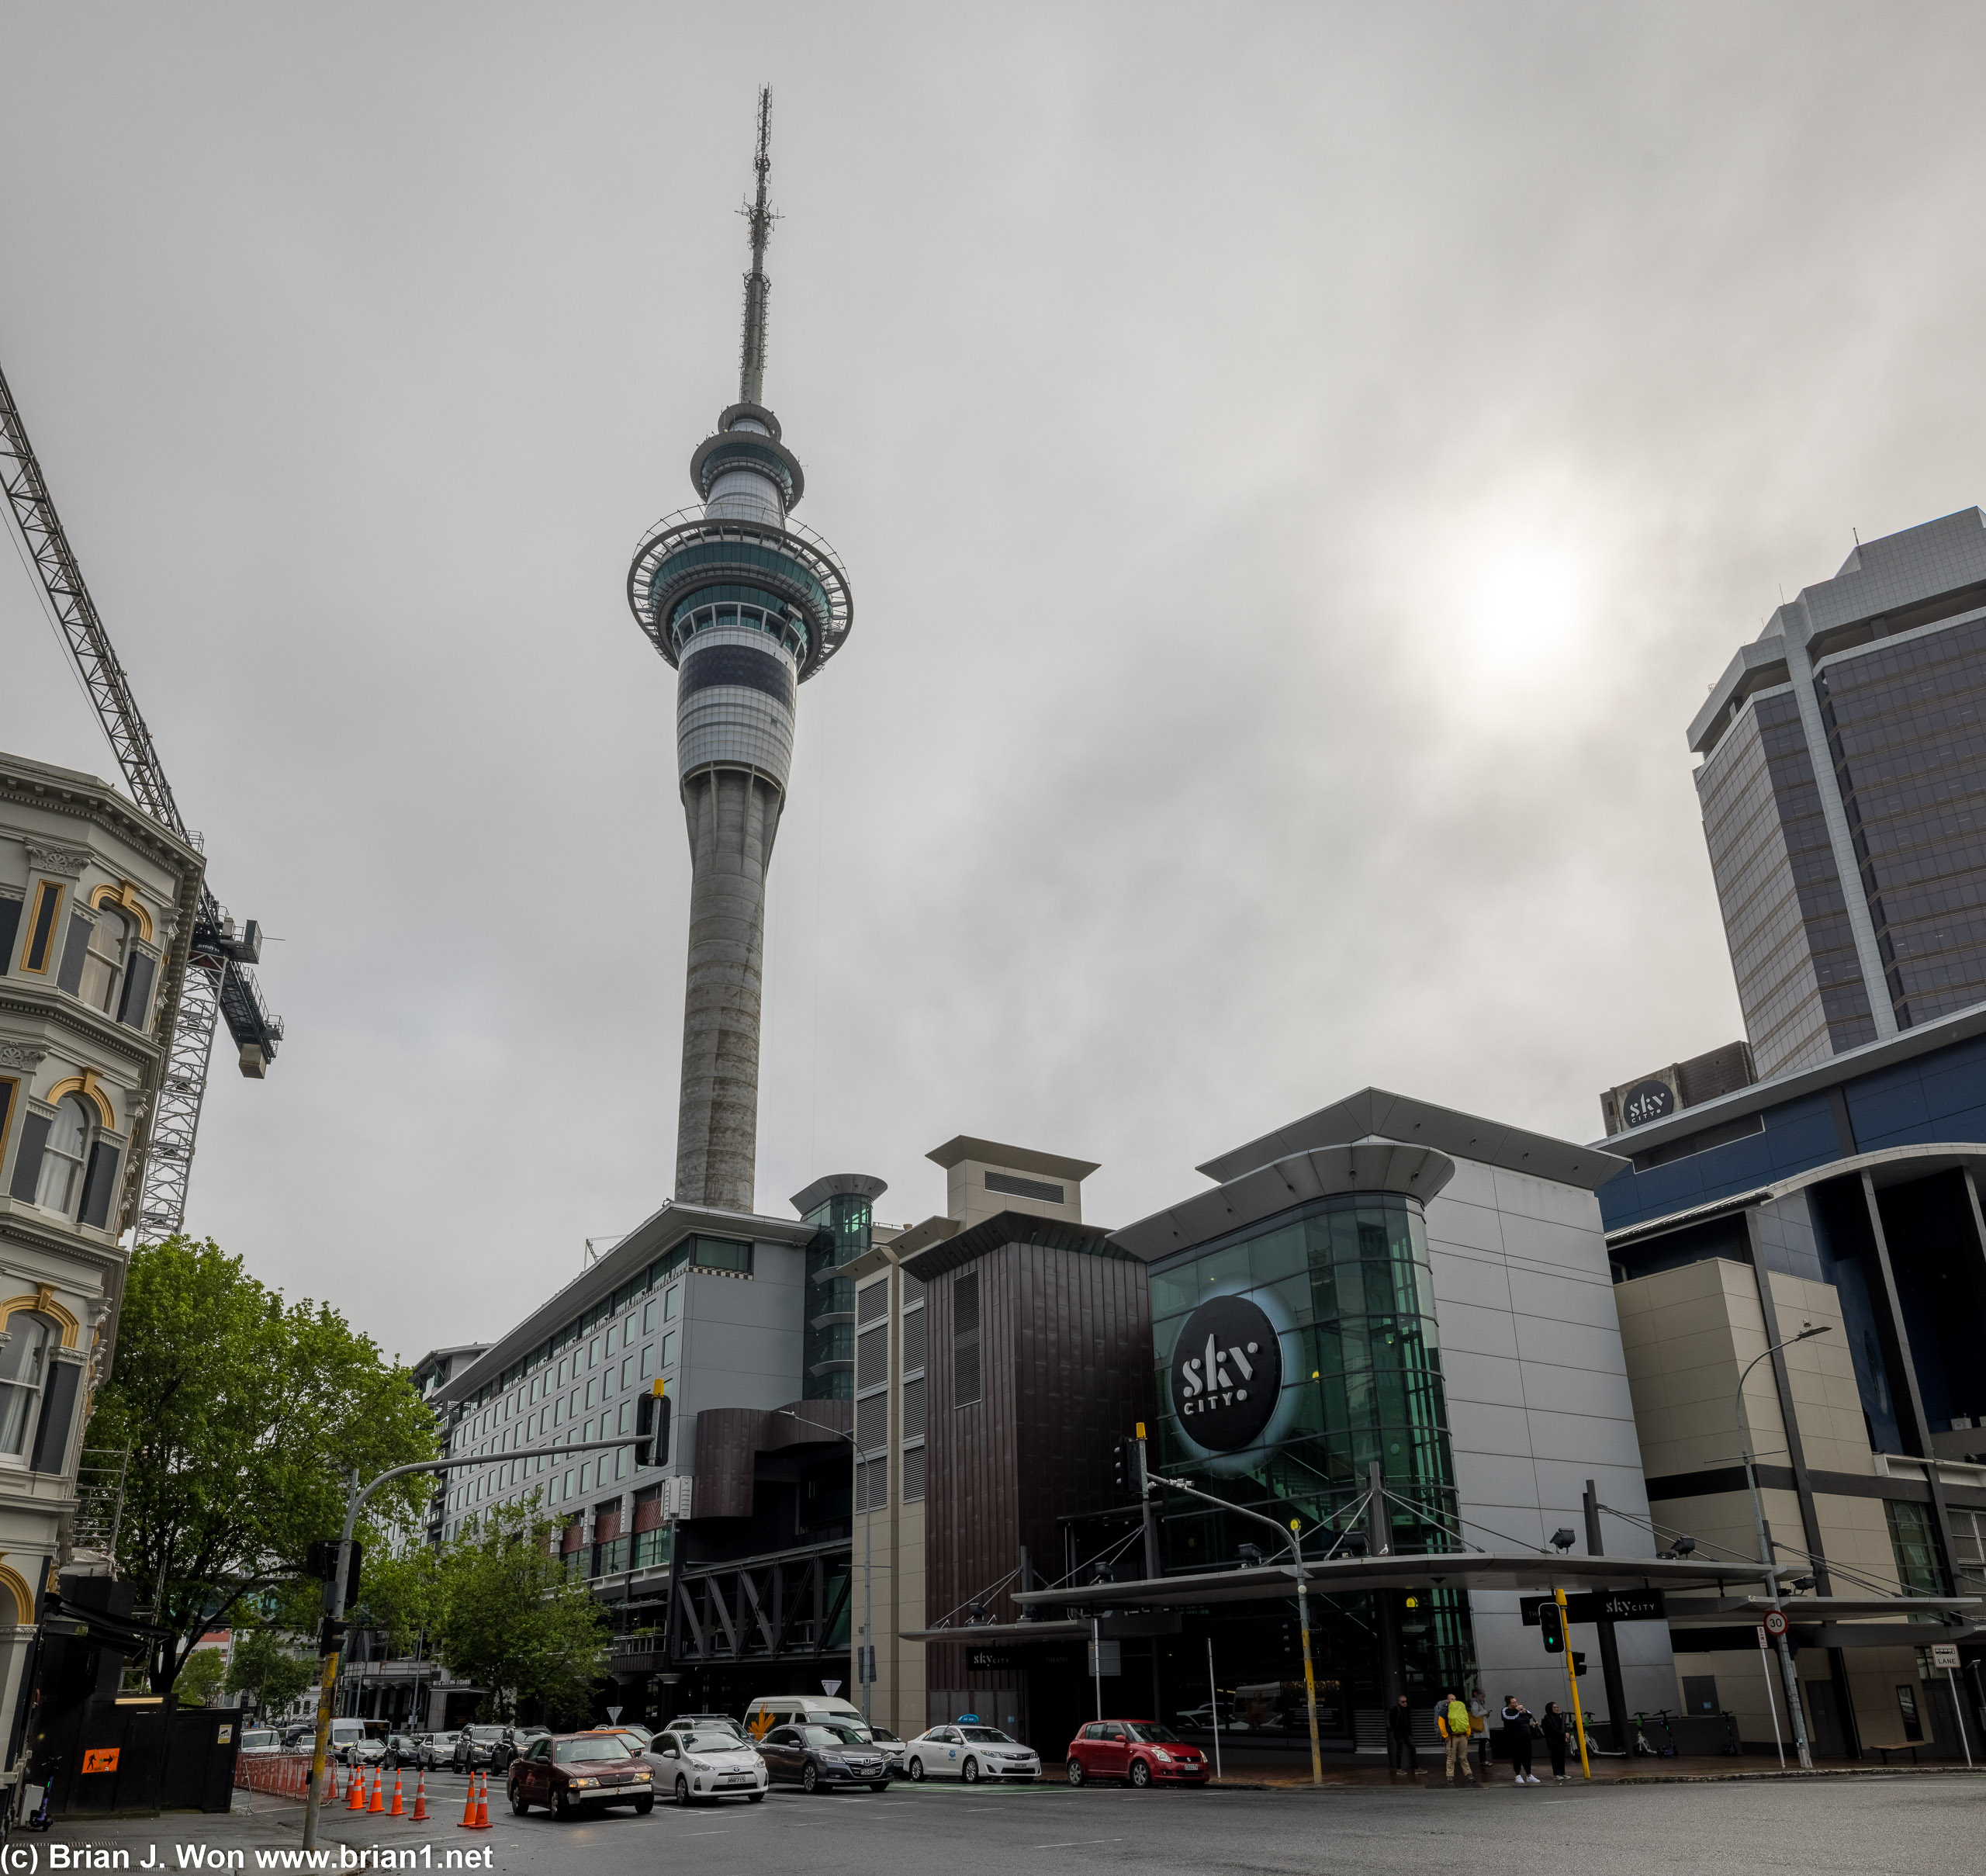 One last shot of the Sky Tower as the clouds finally begin to lift.